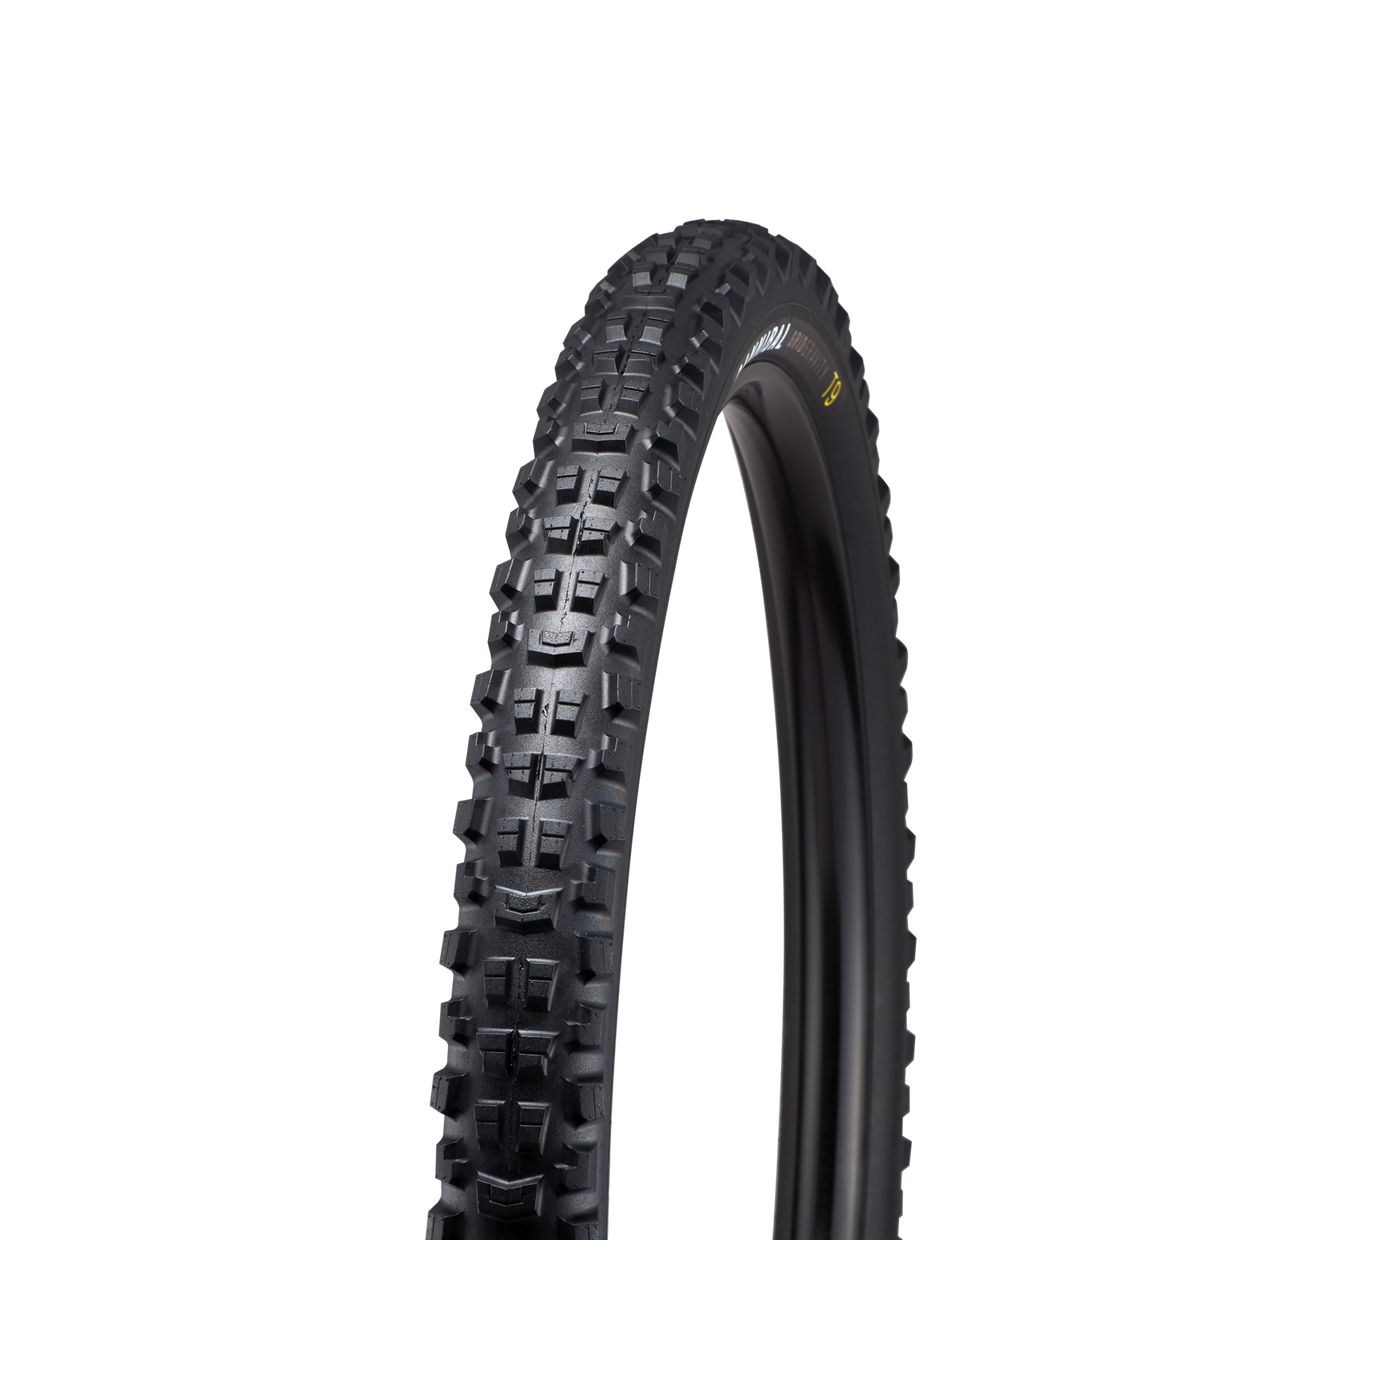 Specialized Cannibal Grid Gravity 2Bliss Ready T9 29" Bike Tire - Tires - Bicycle Warehouse